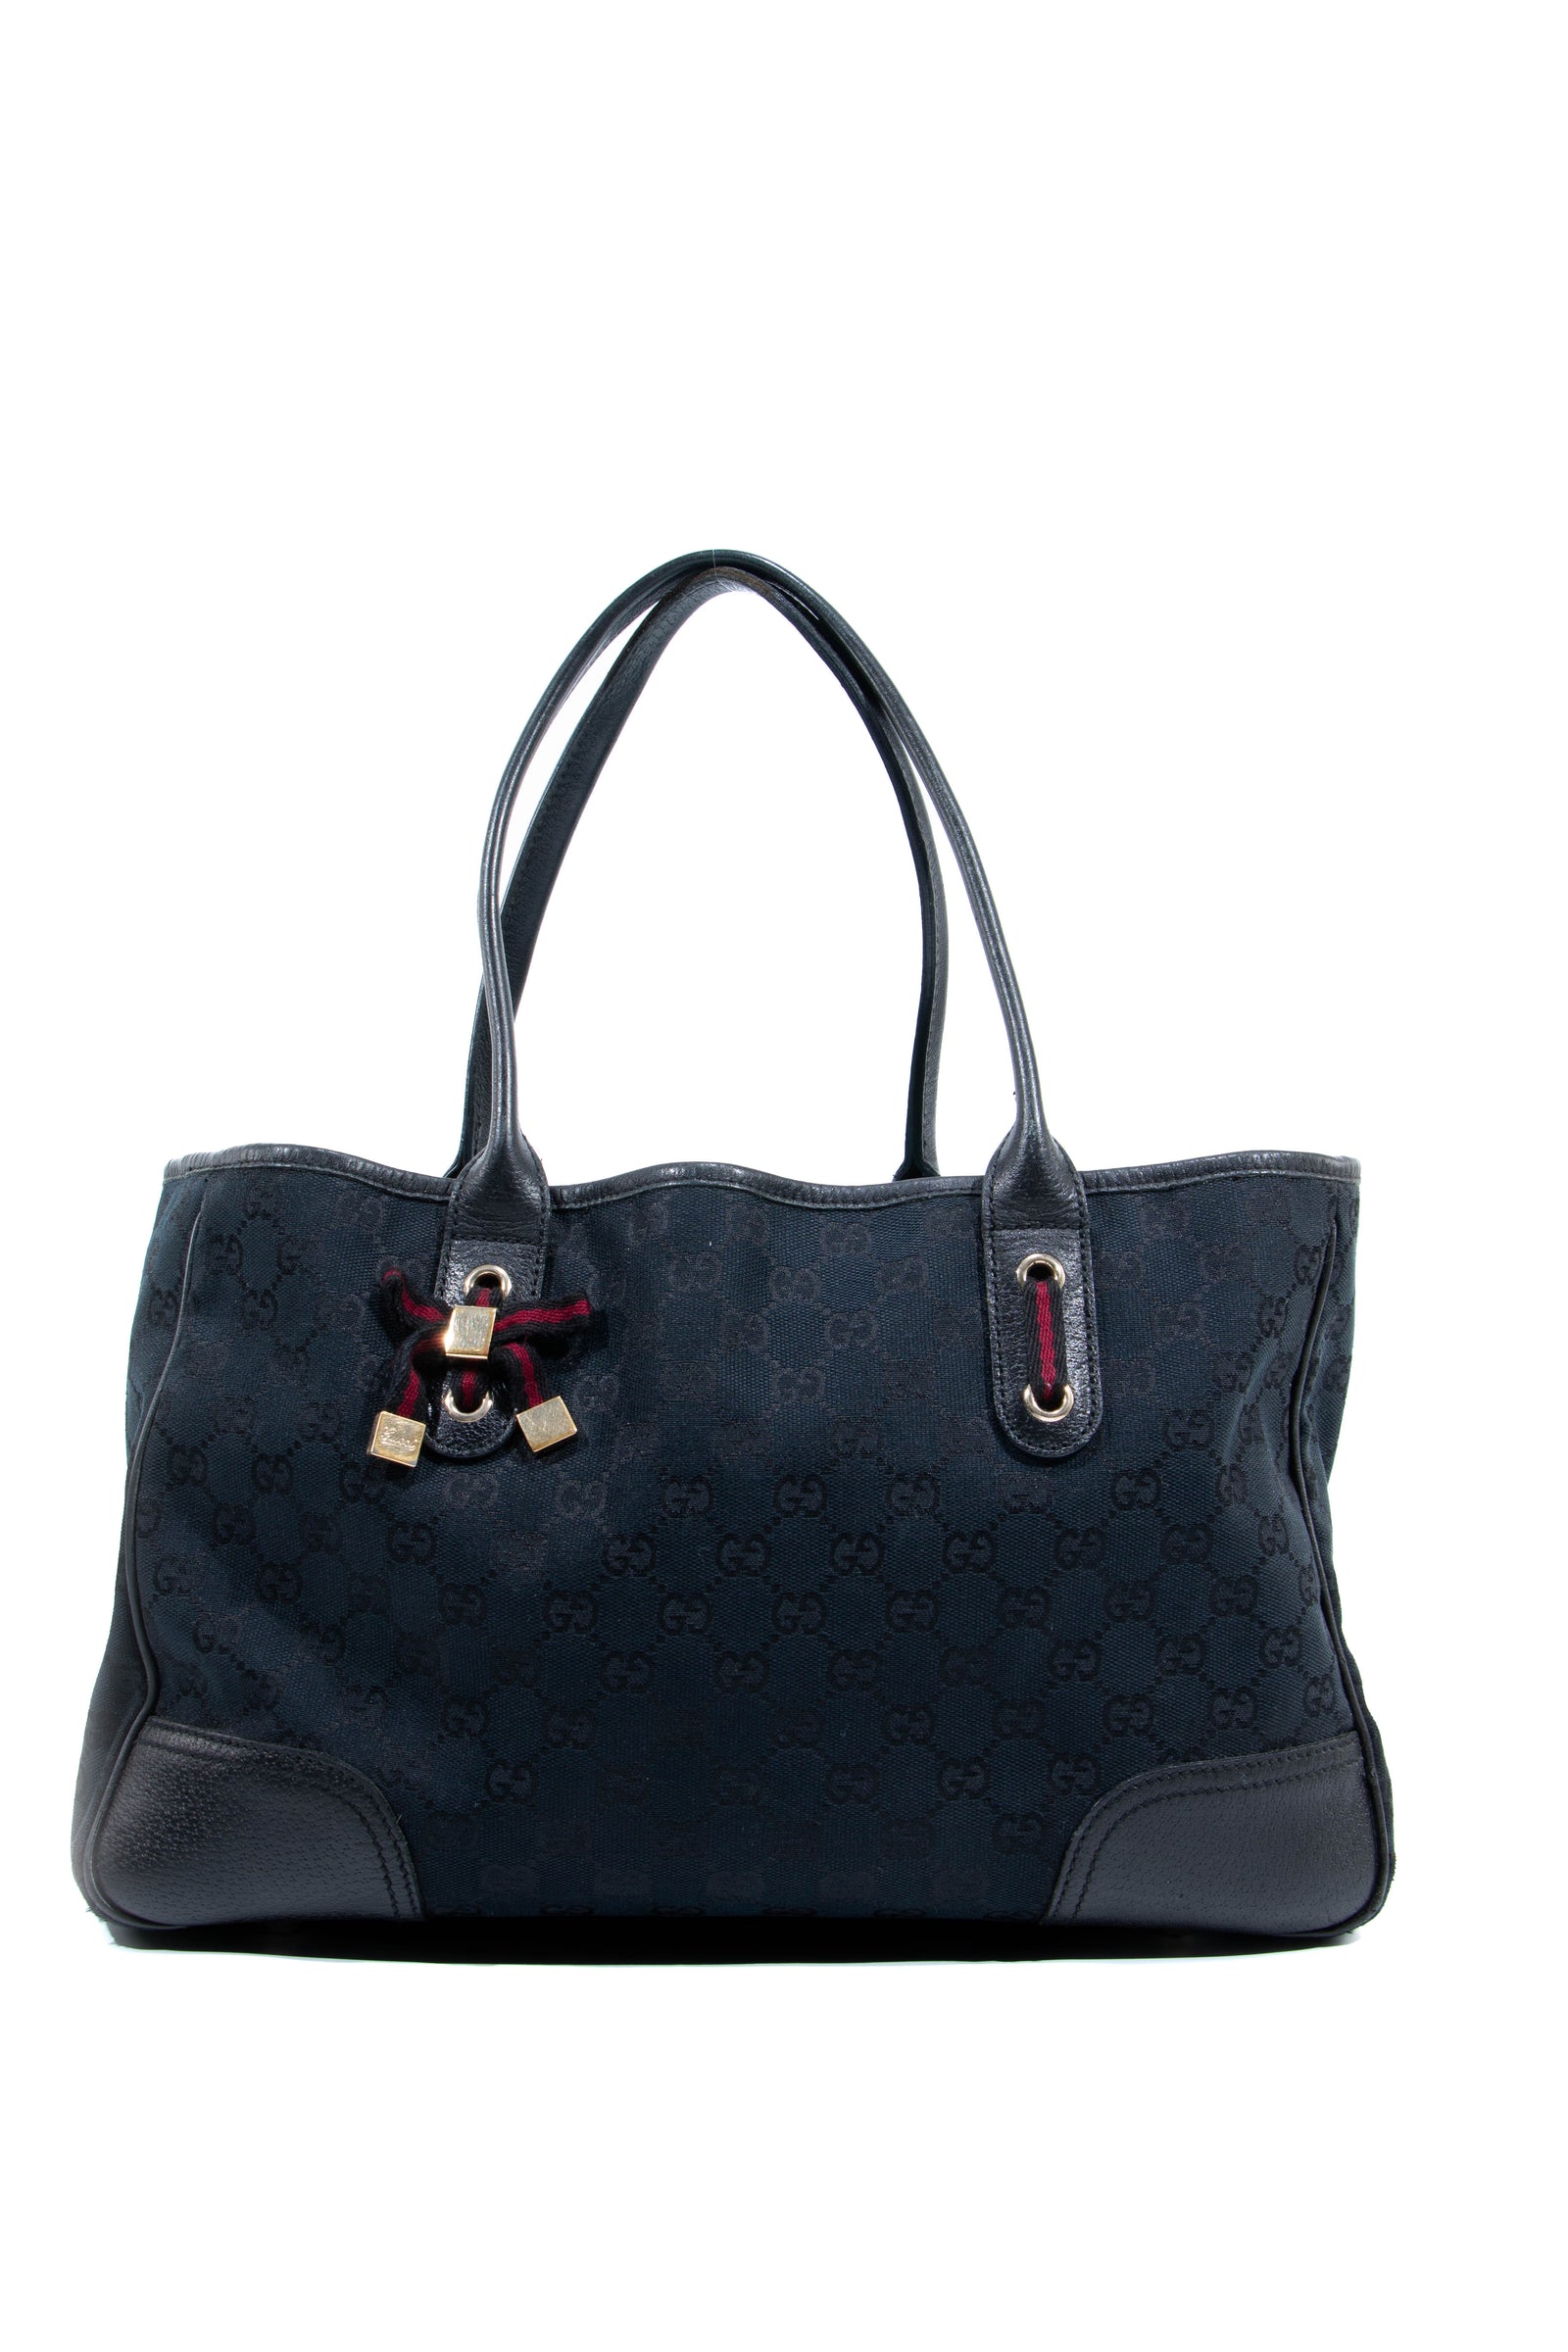 Gucci Bags - Shop your next Gucci Bag at Collector's Cage – Collectors cage